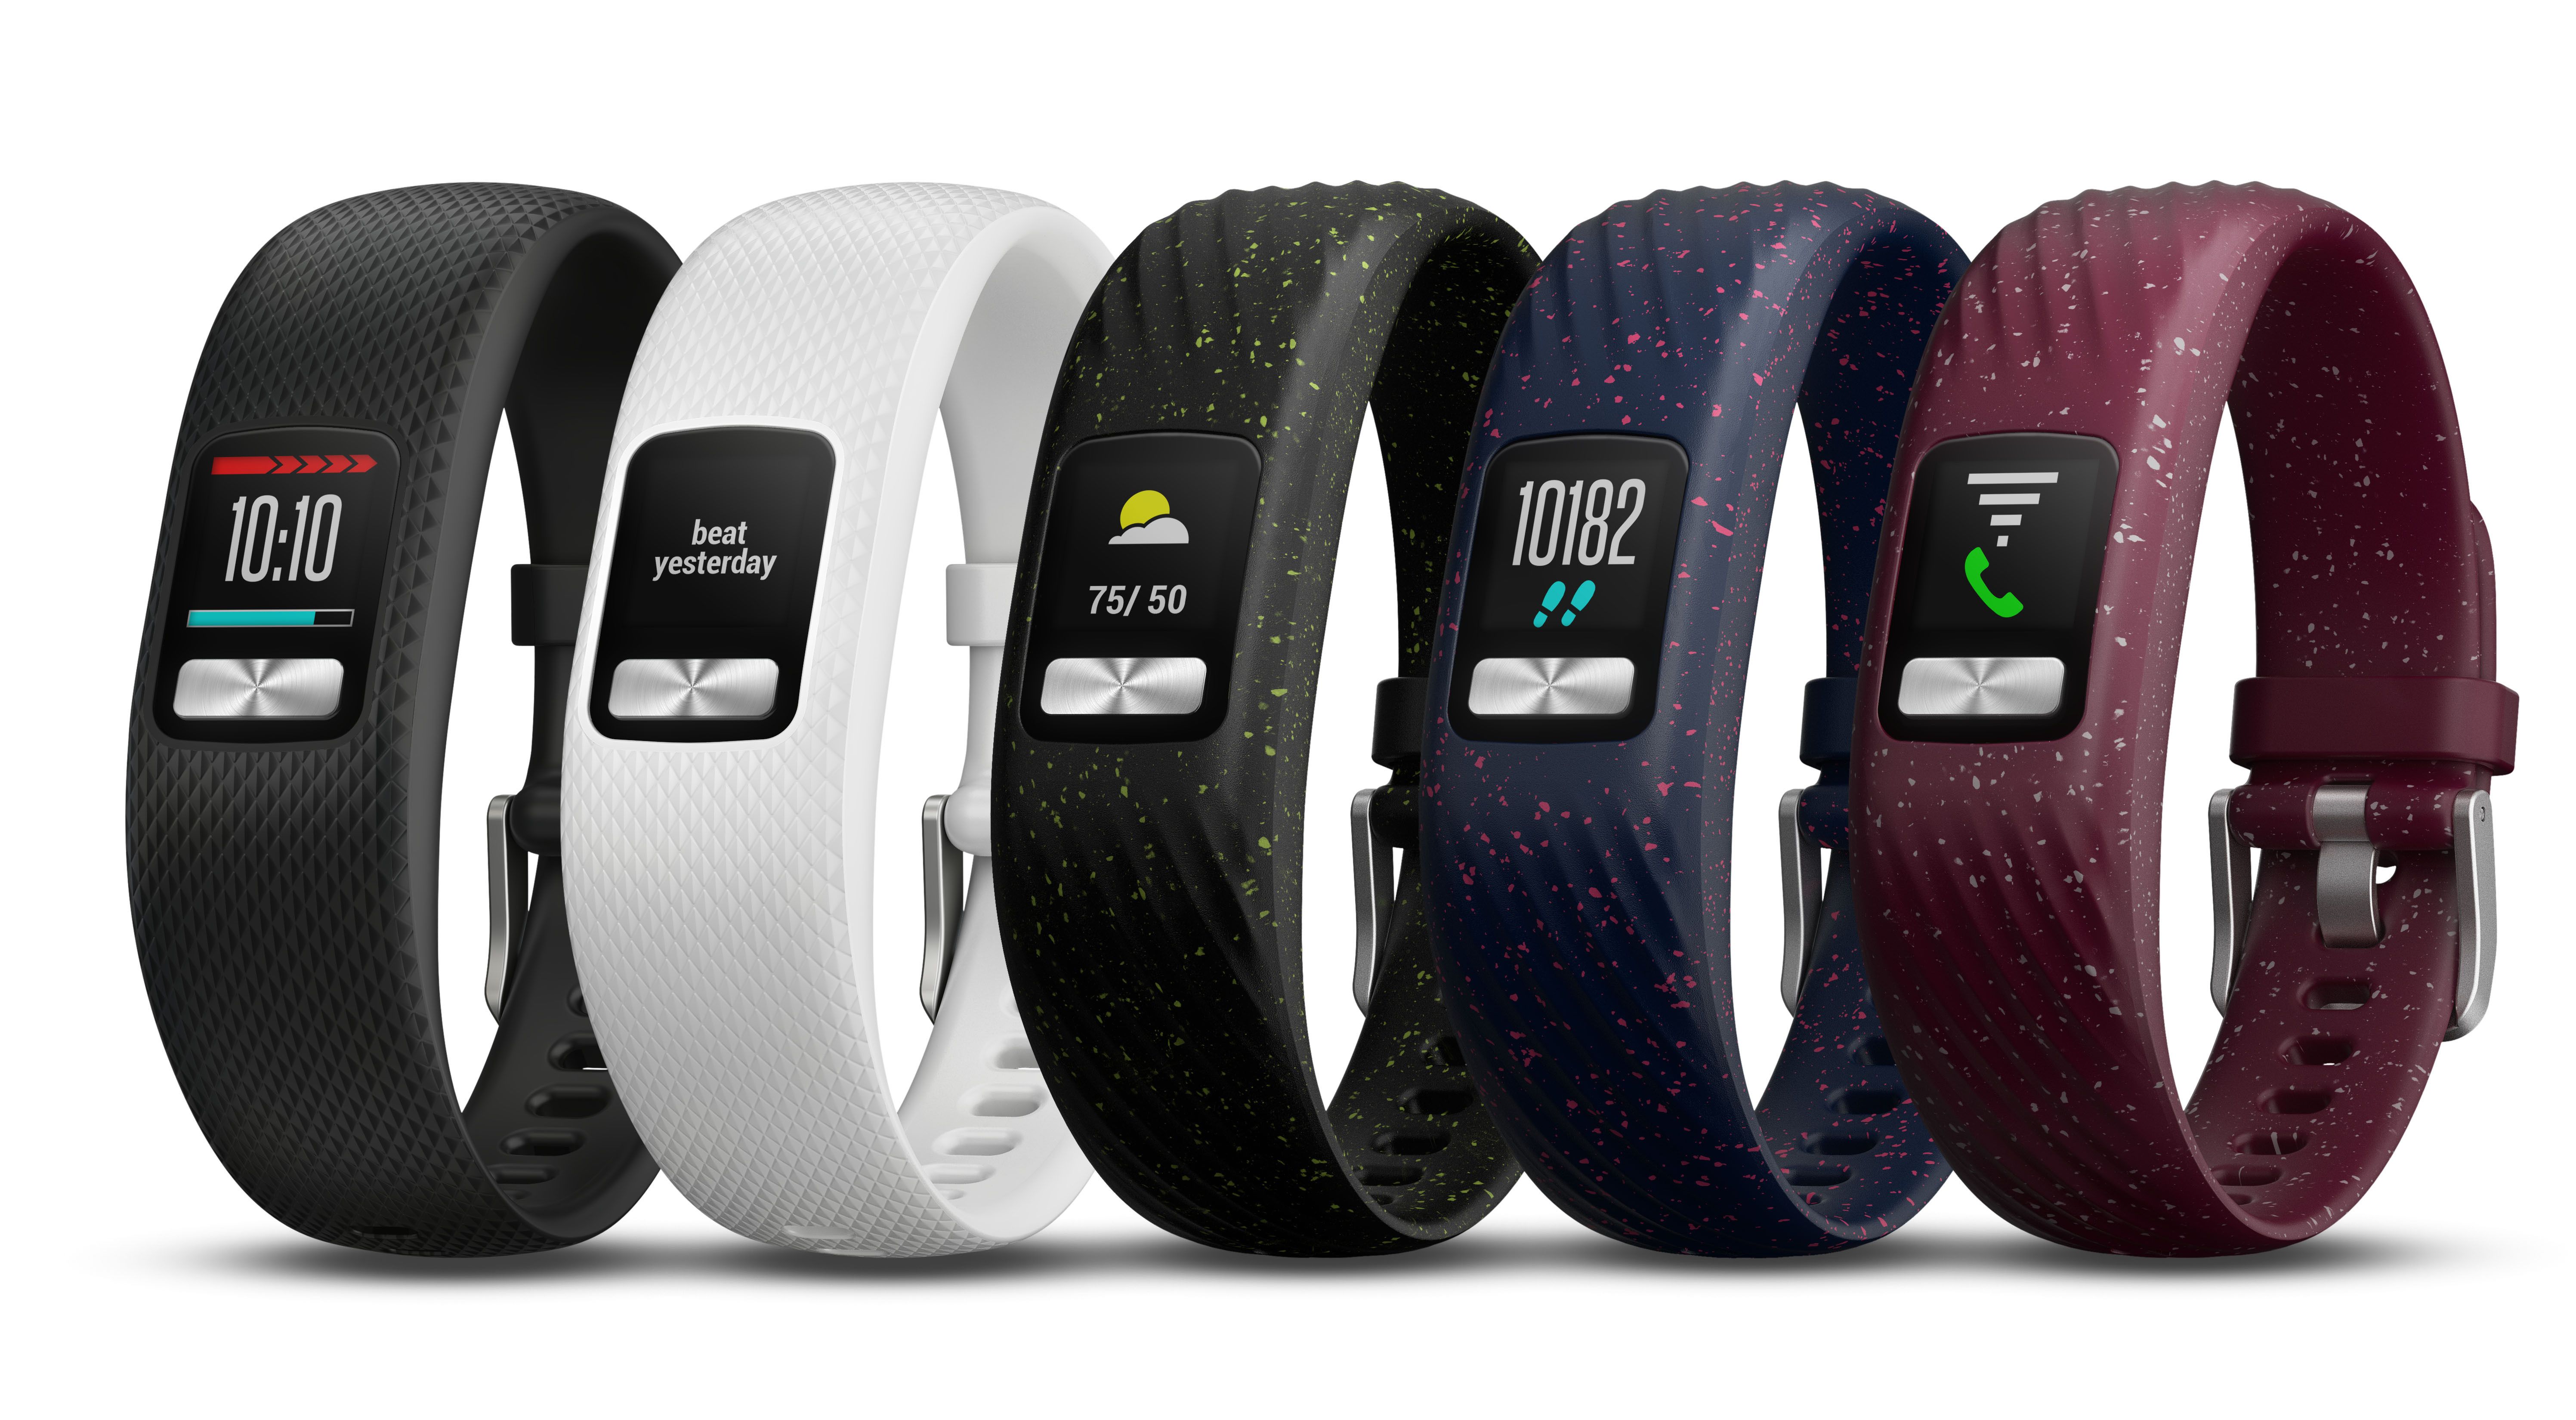 Garmin launches Vivofit 4 fitness tracker with of battery life